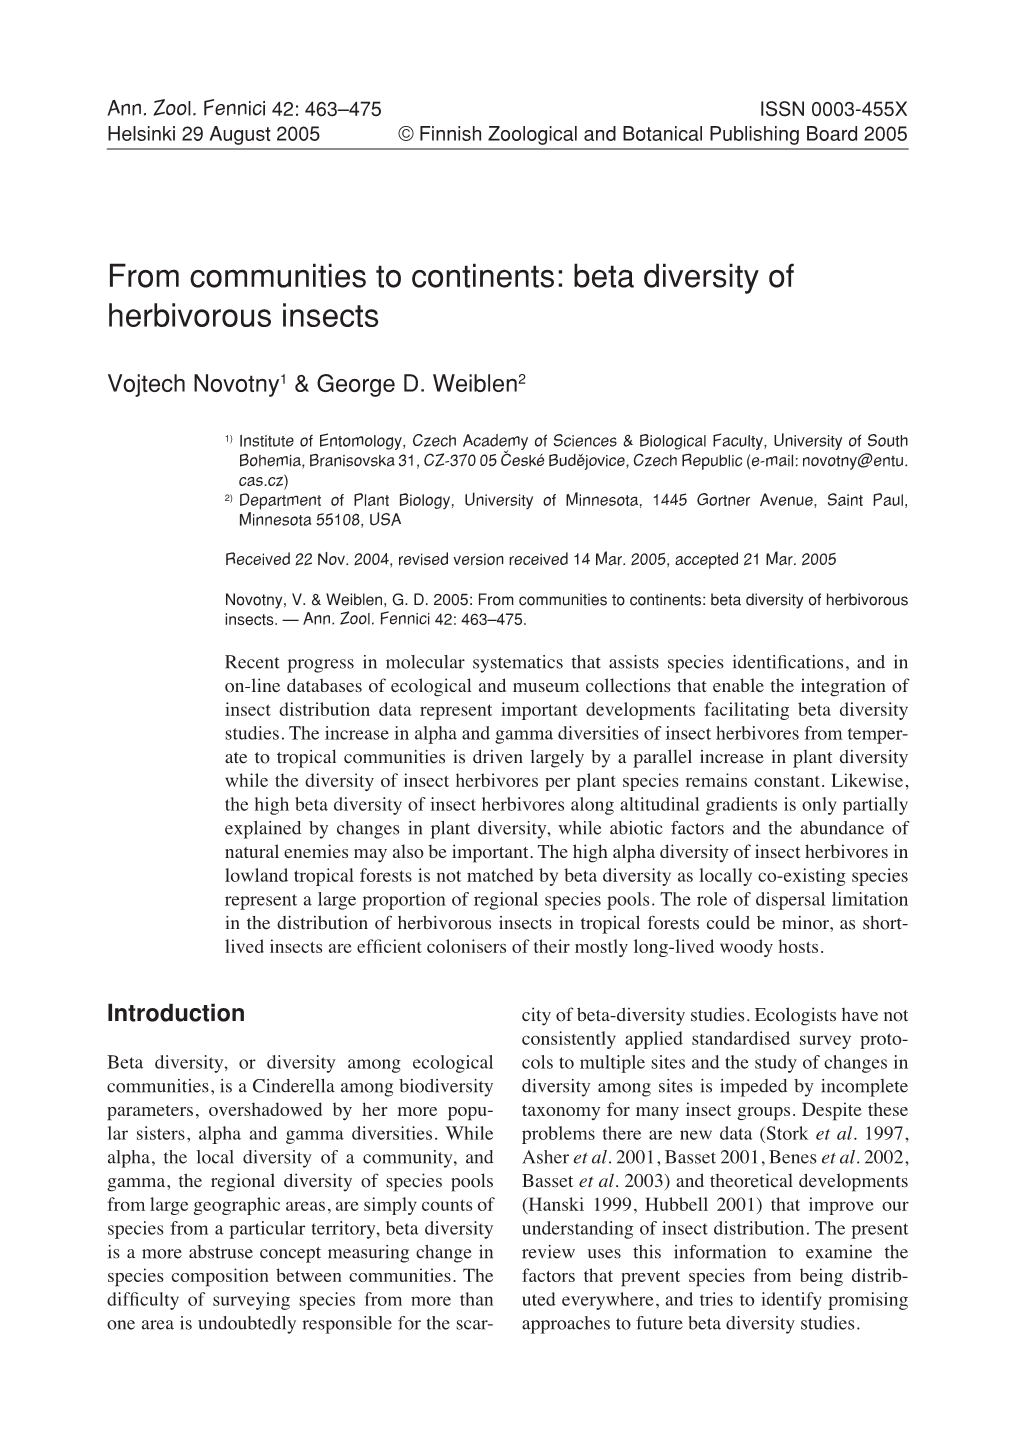 From Communities to Continents: Beta Diversity of Herbivorous Insects